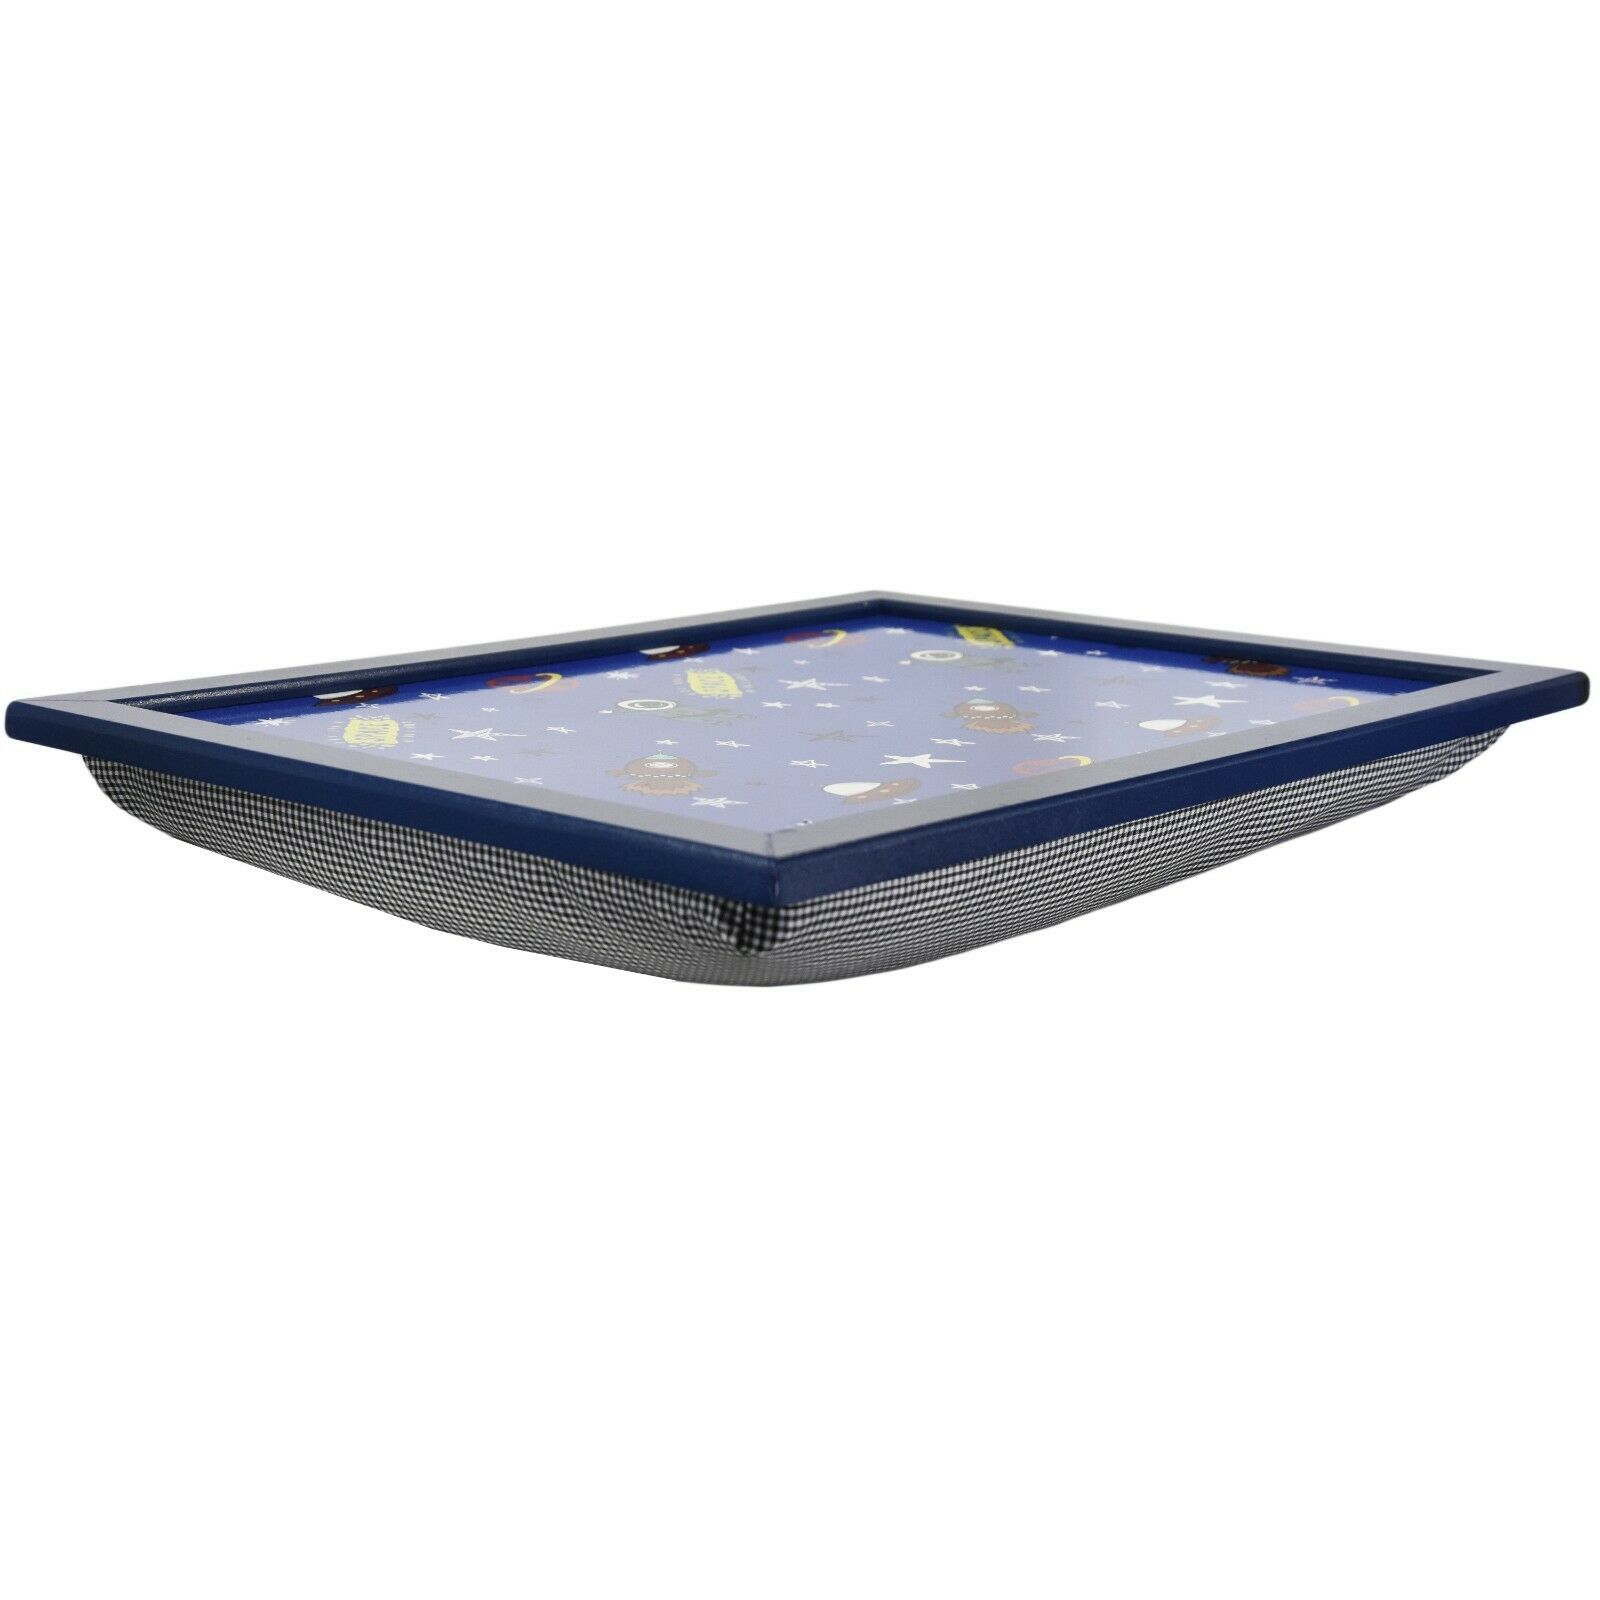 Space Lap Tray With Bean Bag Cushion The Magic Toy Shop - The Magic Toy Shop